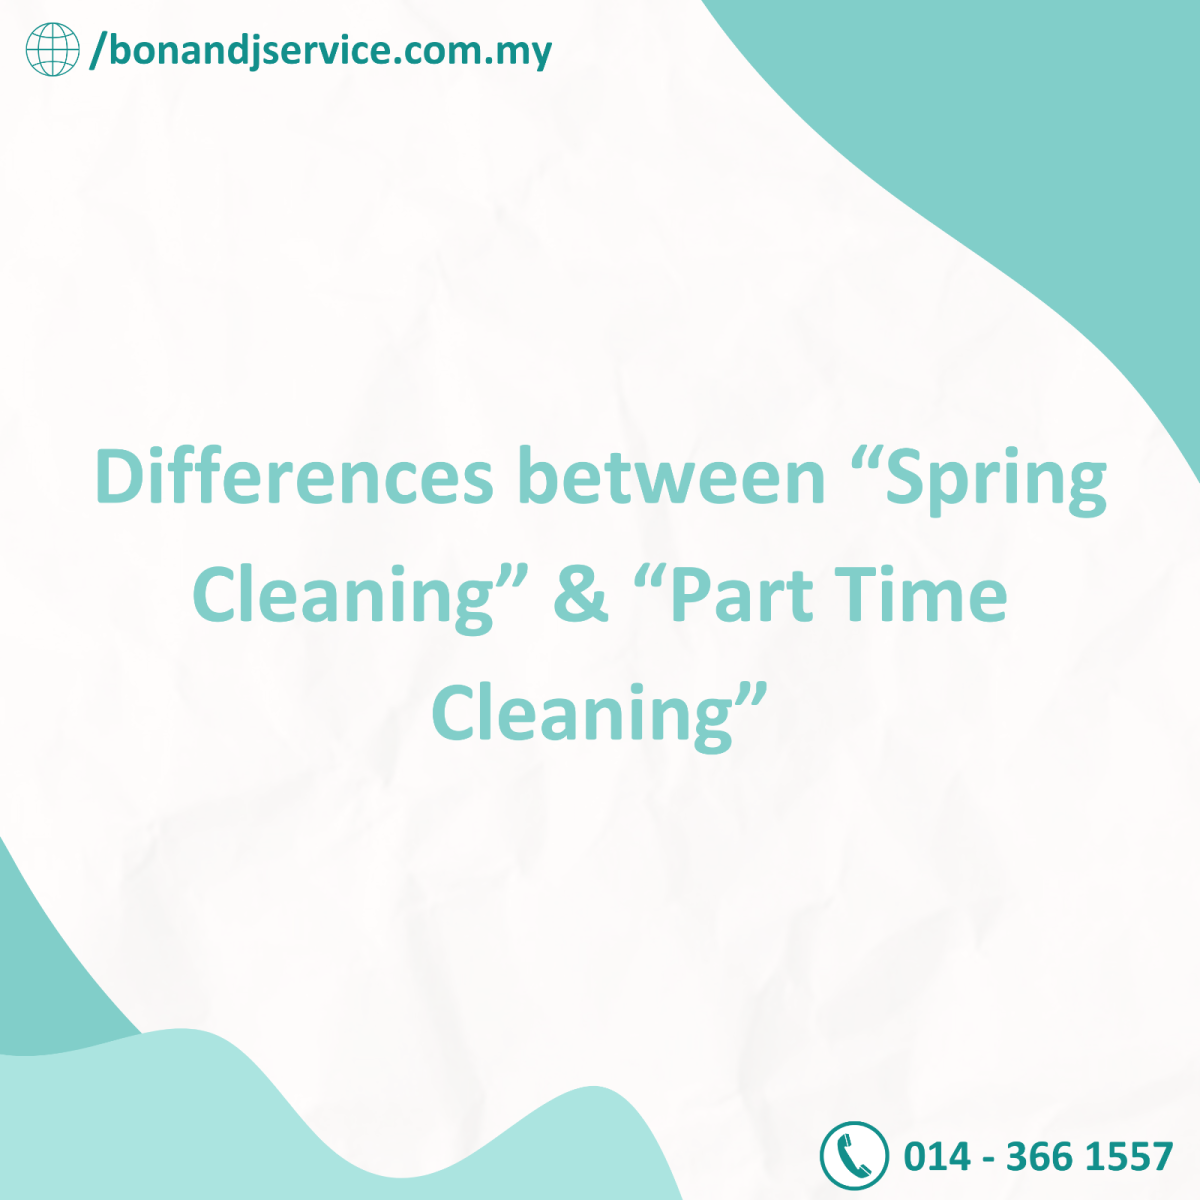 Differences between Spring Cleaning & Part Time Cleaning